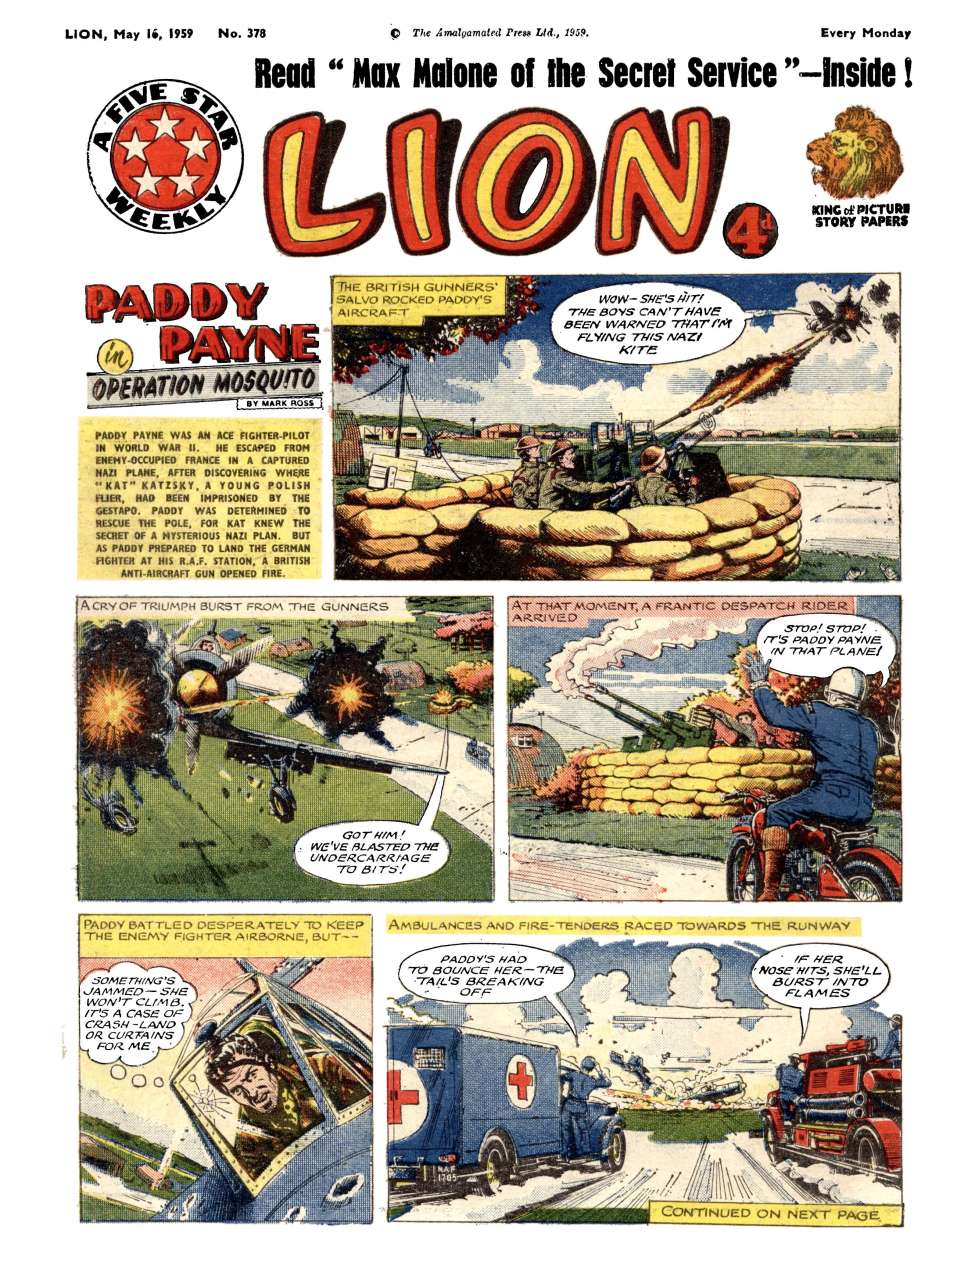 Book Cover For Lion 378